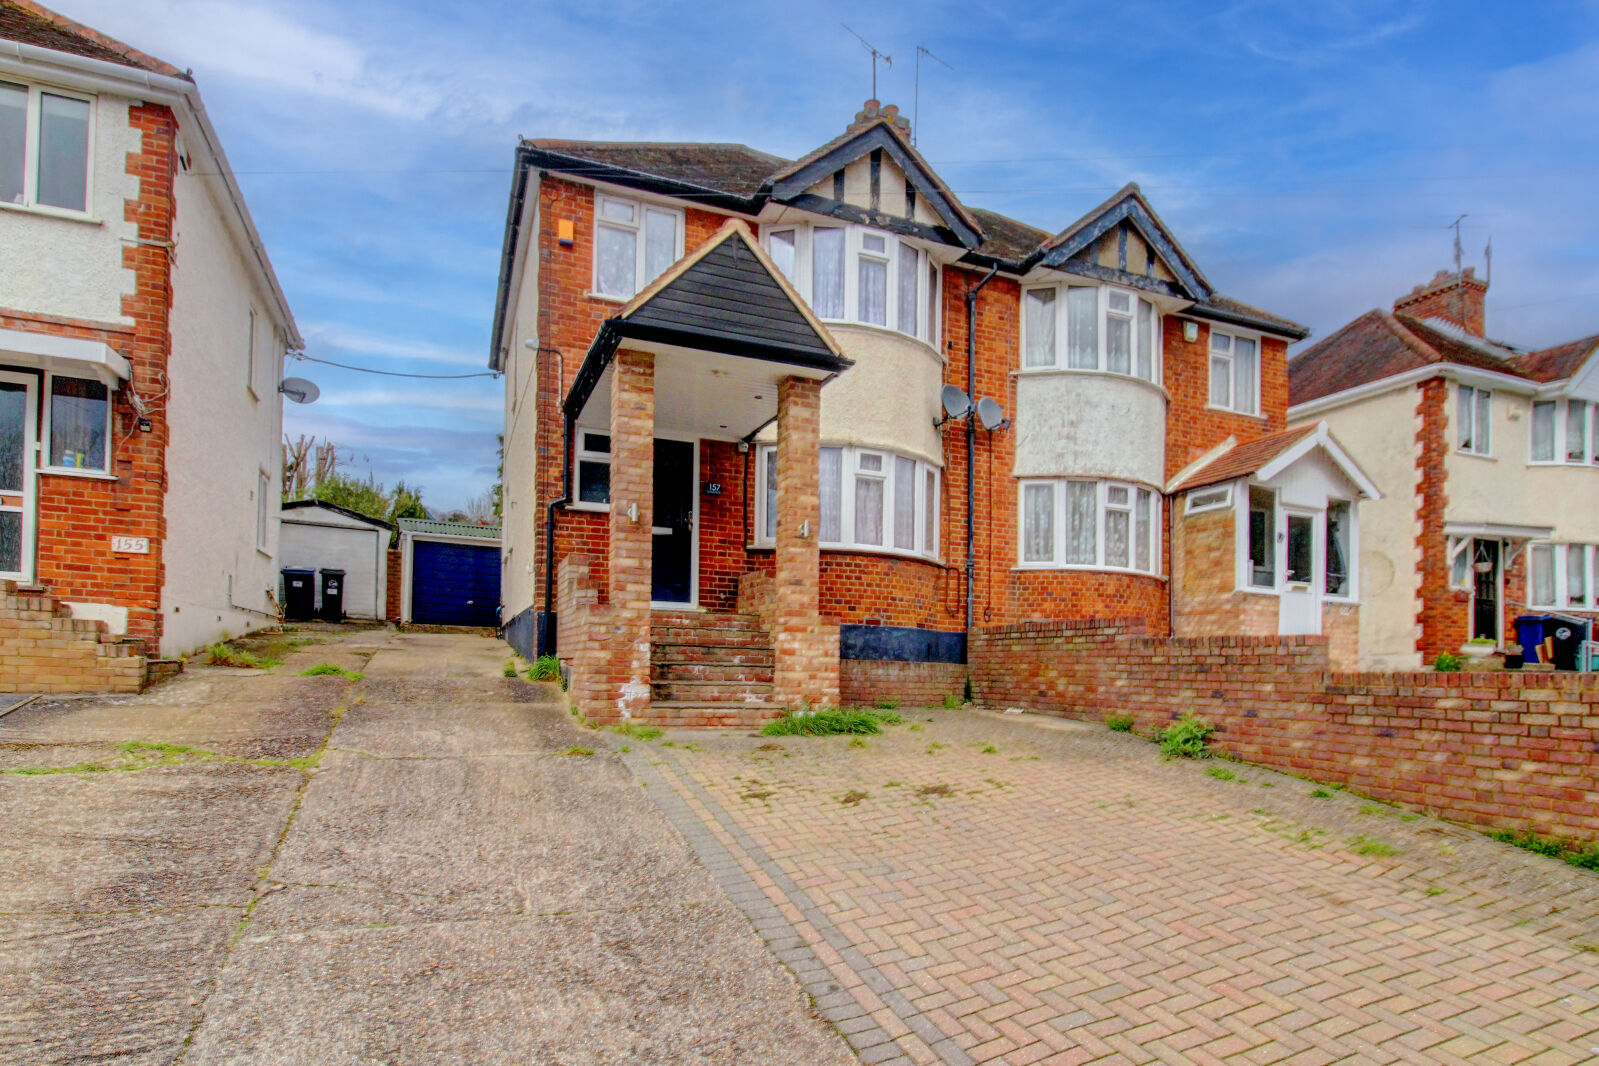 3 bedroom semi detached house for sale Micklefield Road, High Wycombe, HP13, main image